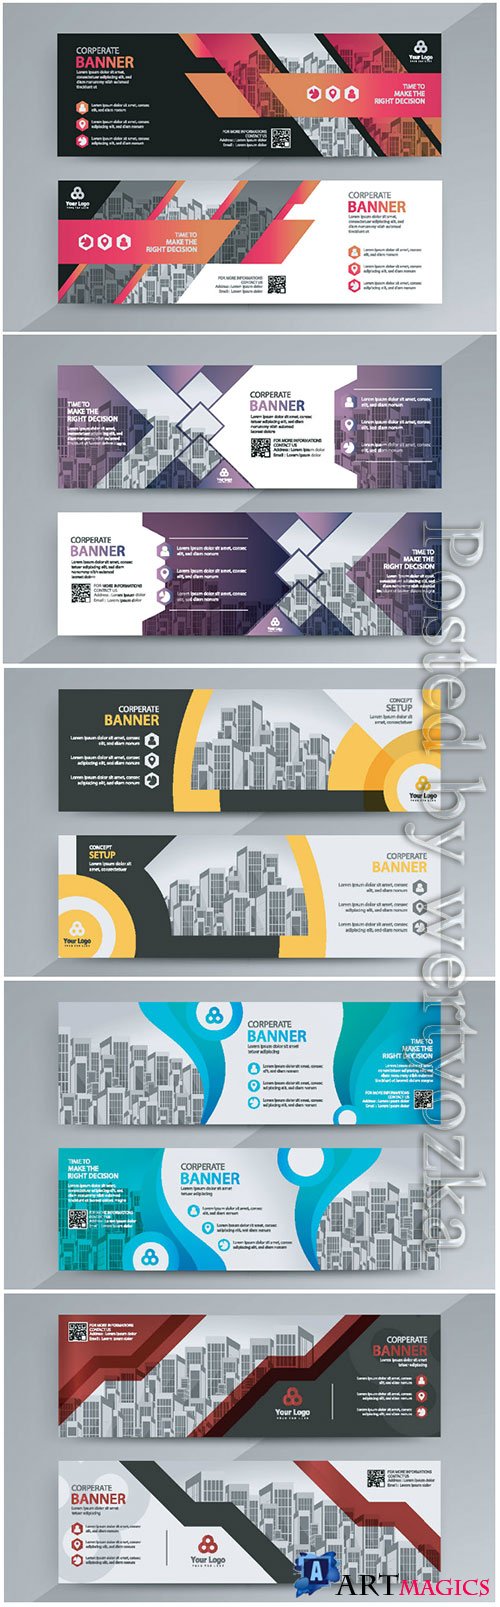 Horizontal advertising business banner layout template 